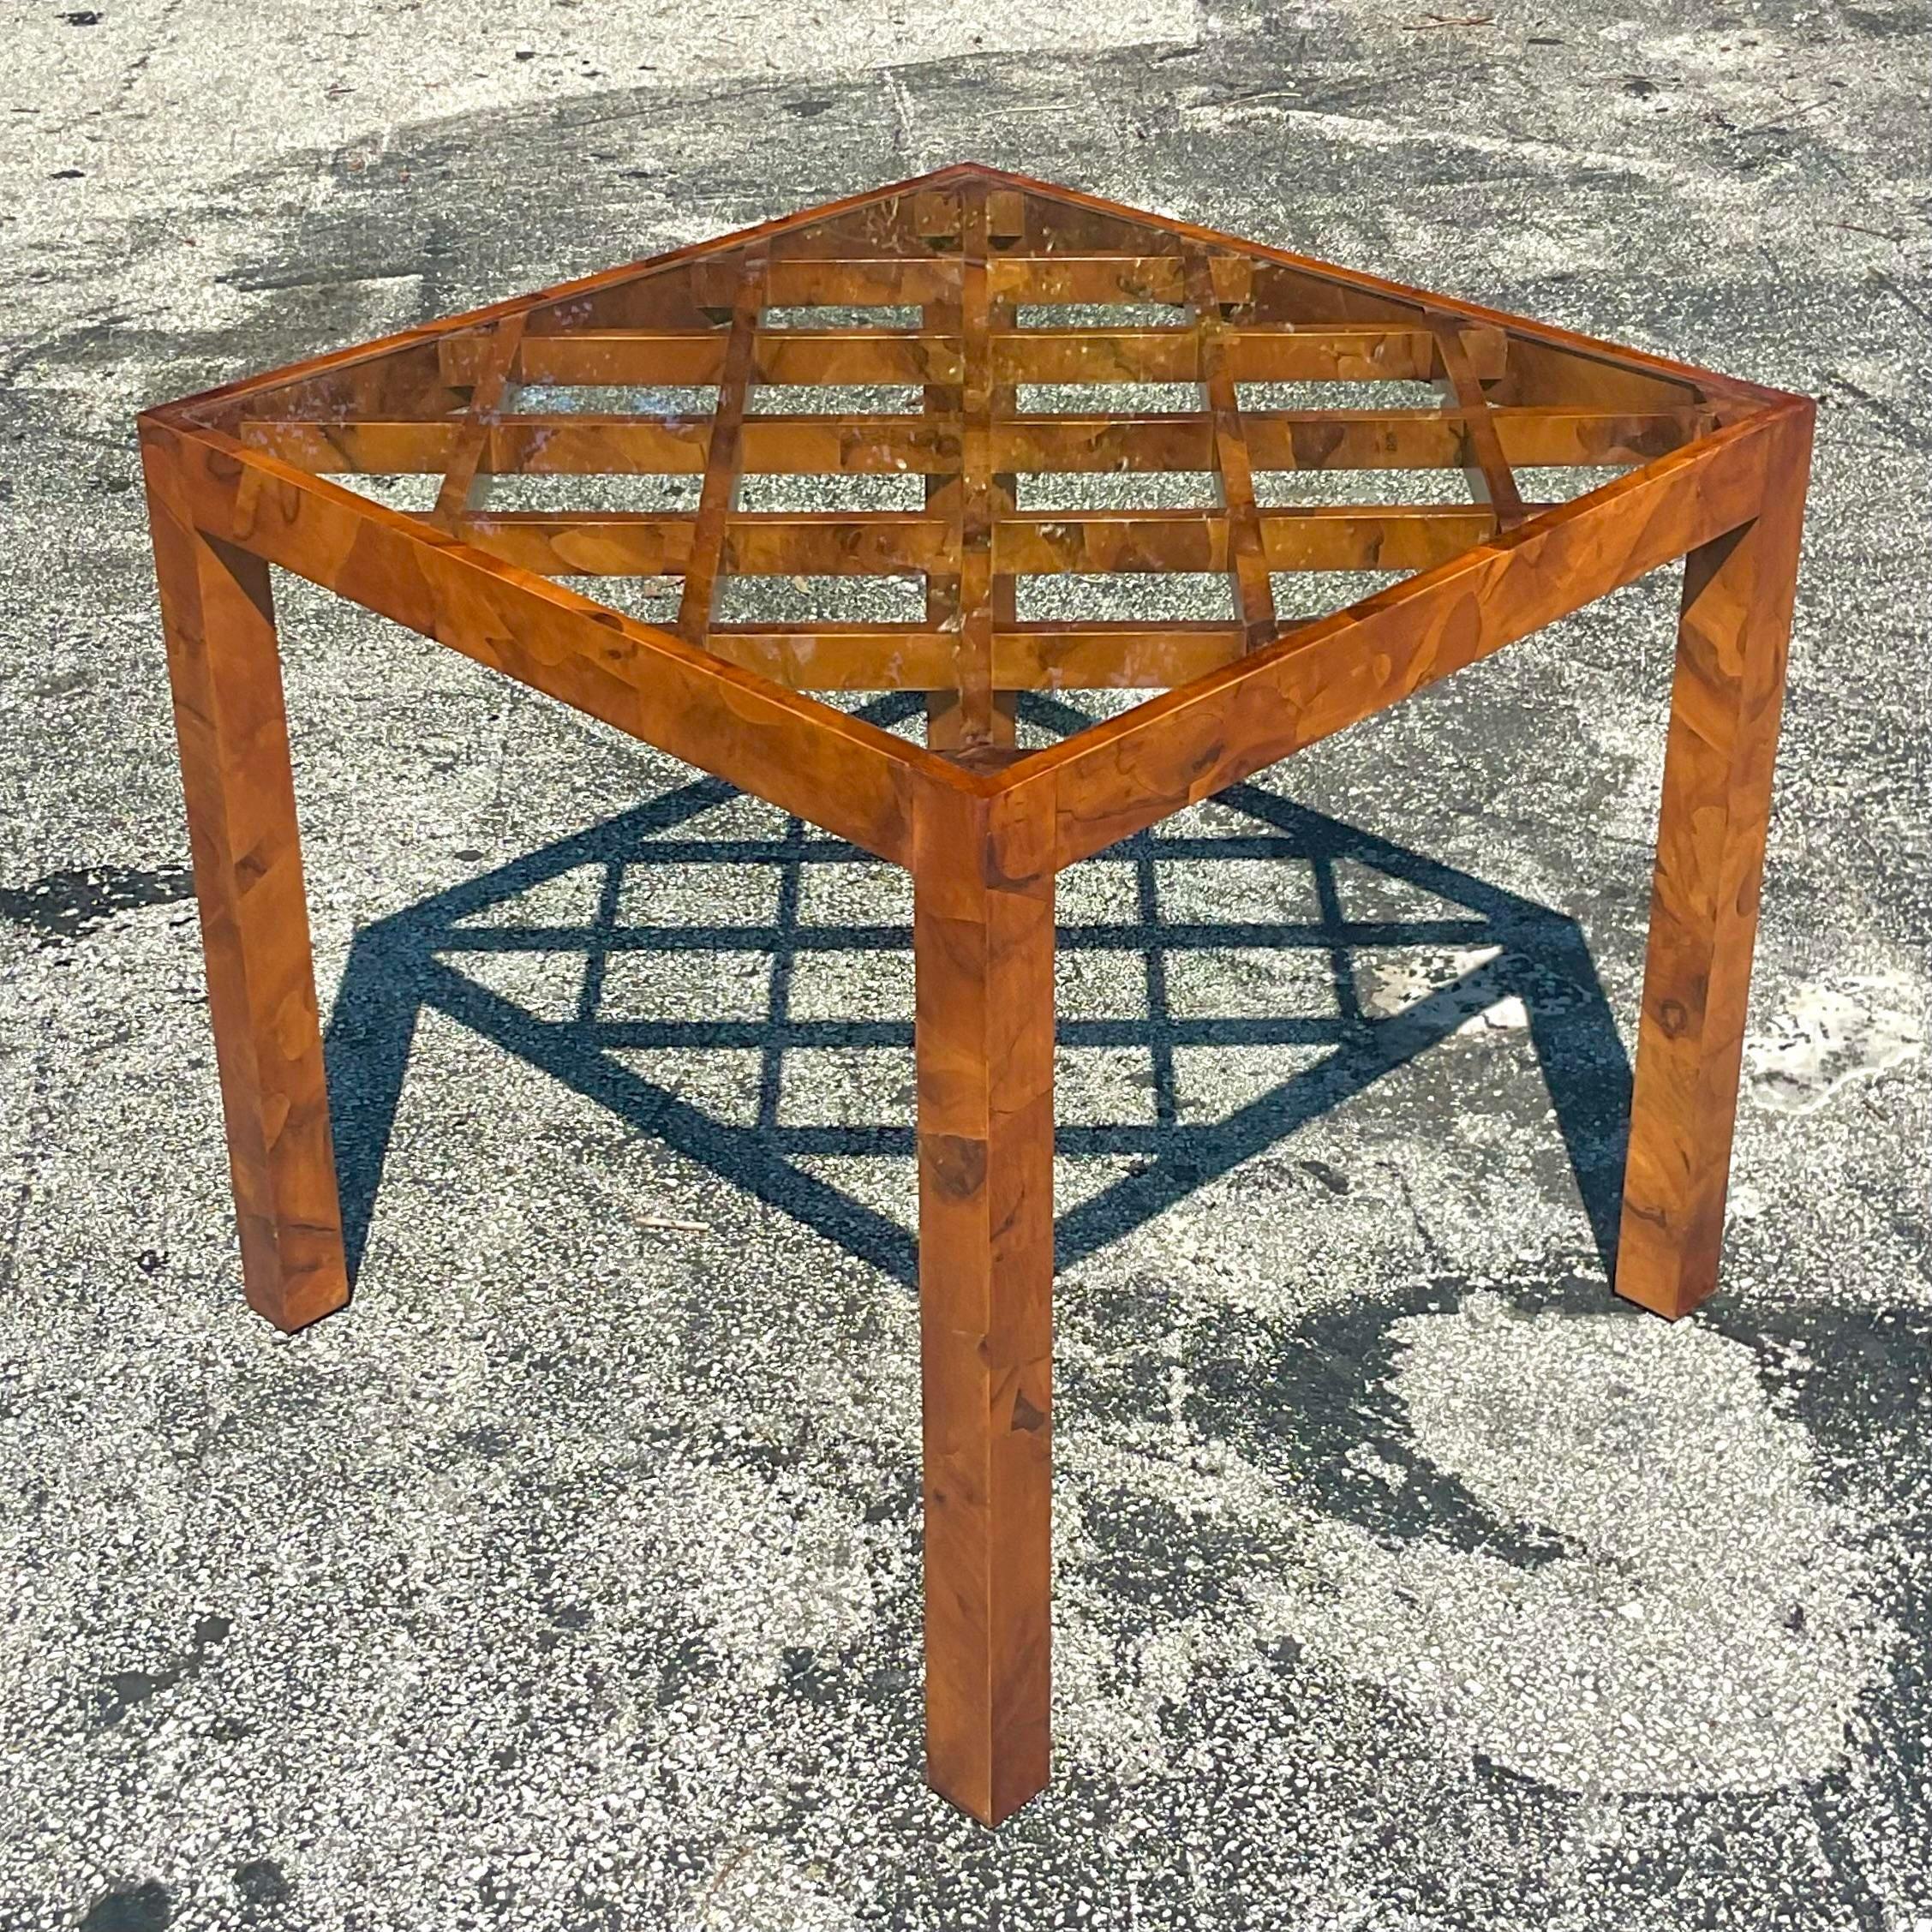 A fabulous vintage Boho game table. A chic Italian Burl wood frame with a trellis top. Inset glass panel. A real beauty. Acquired from a Palm Beach estate.